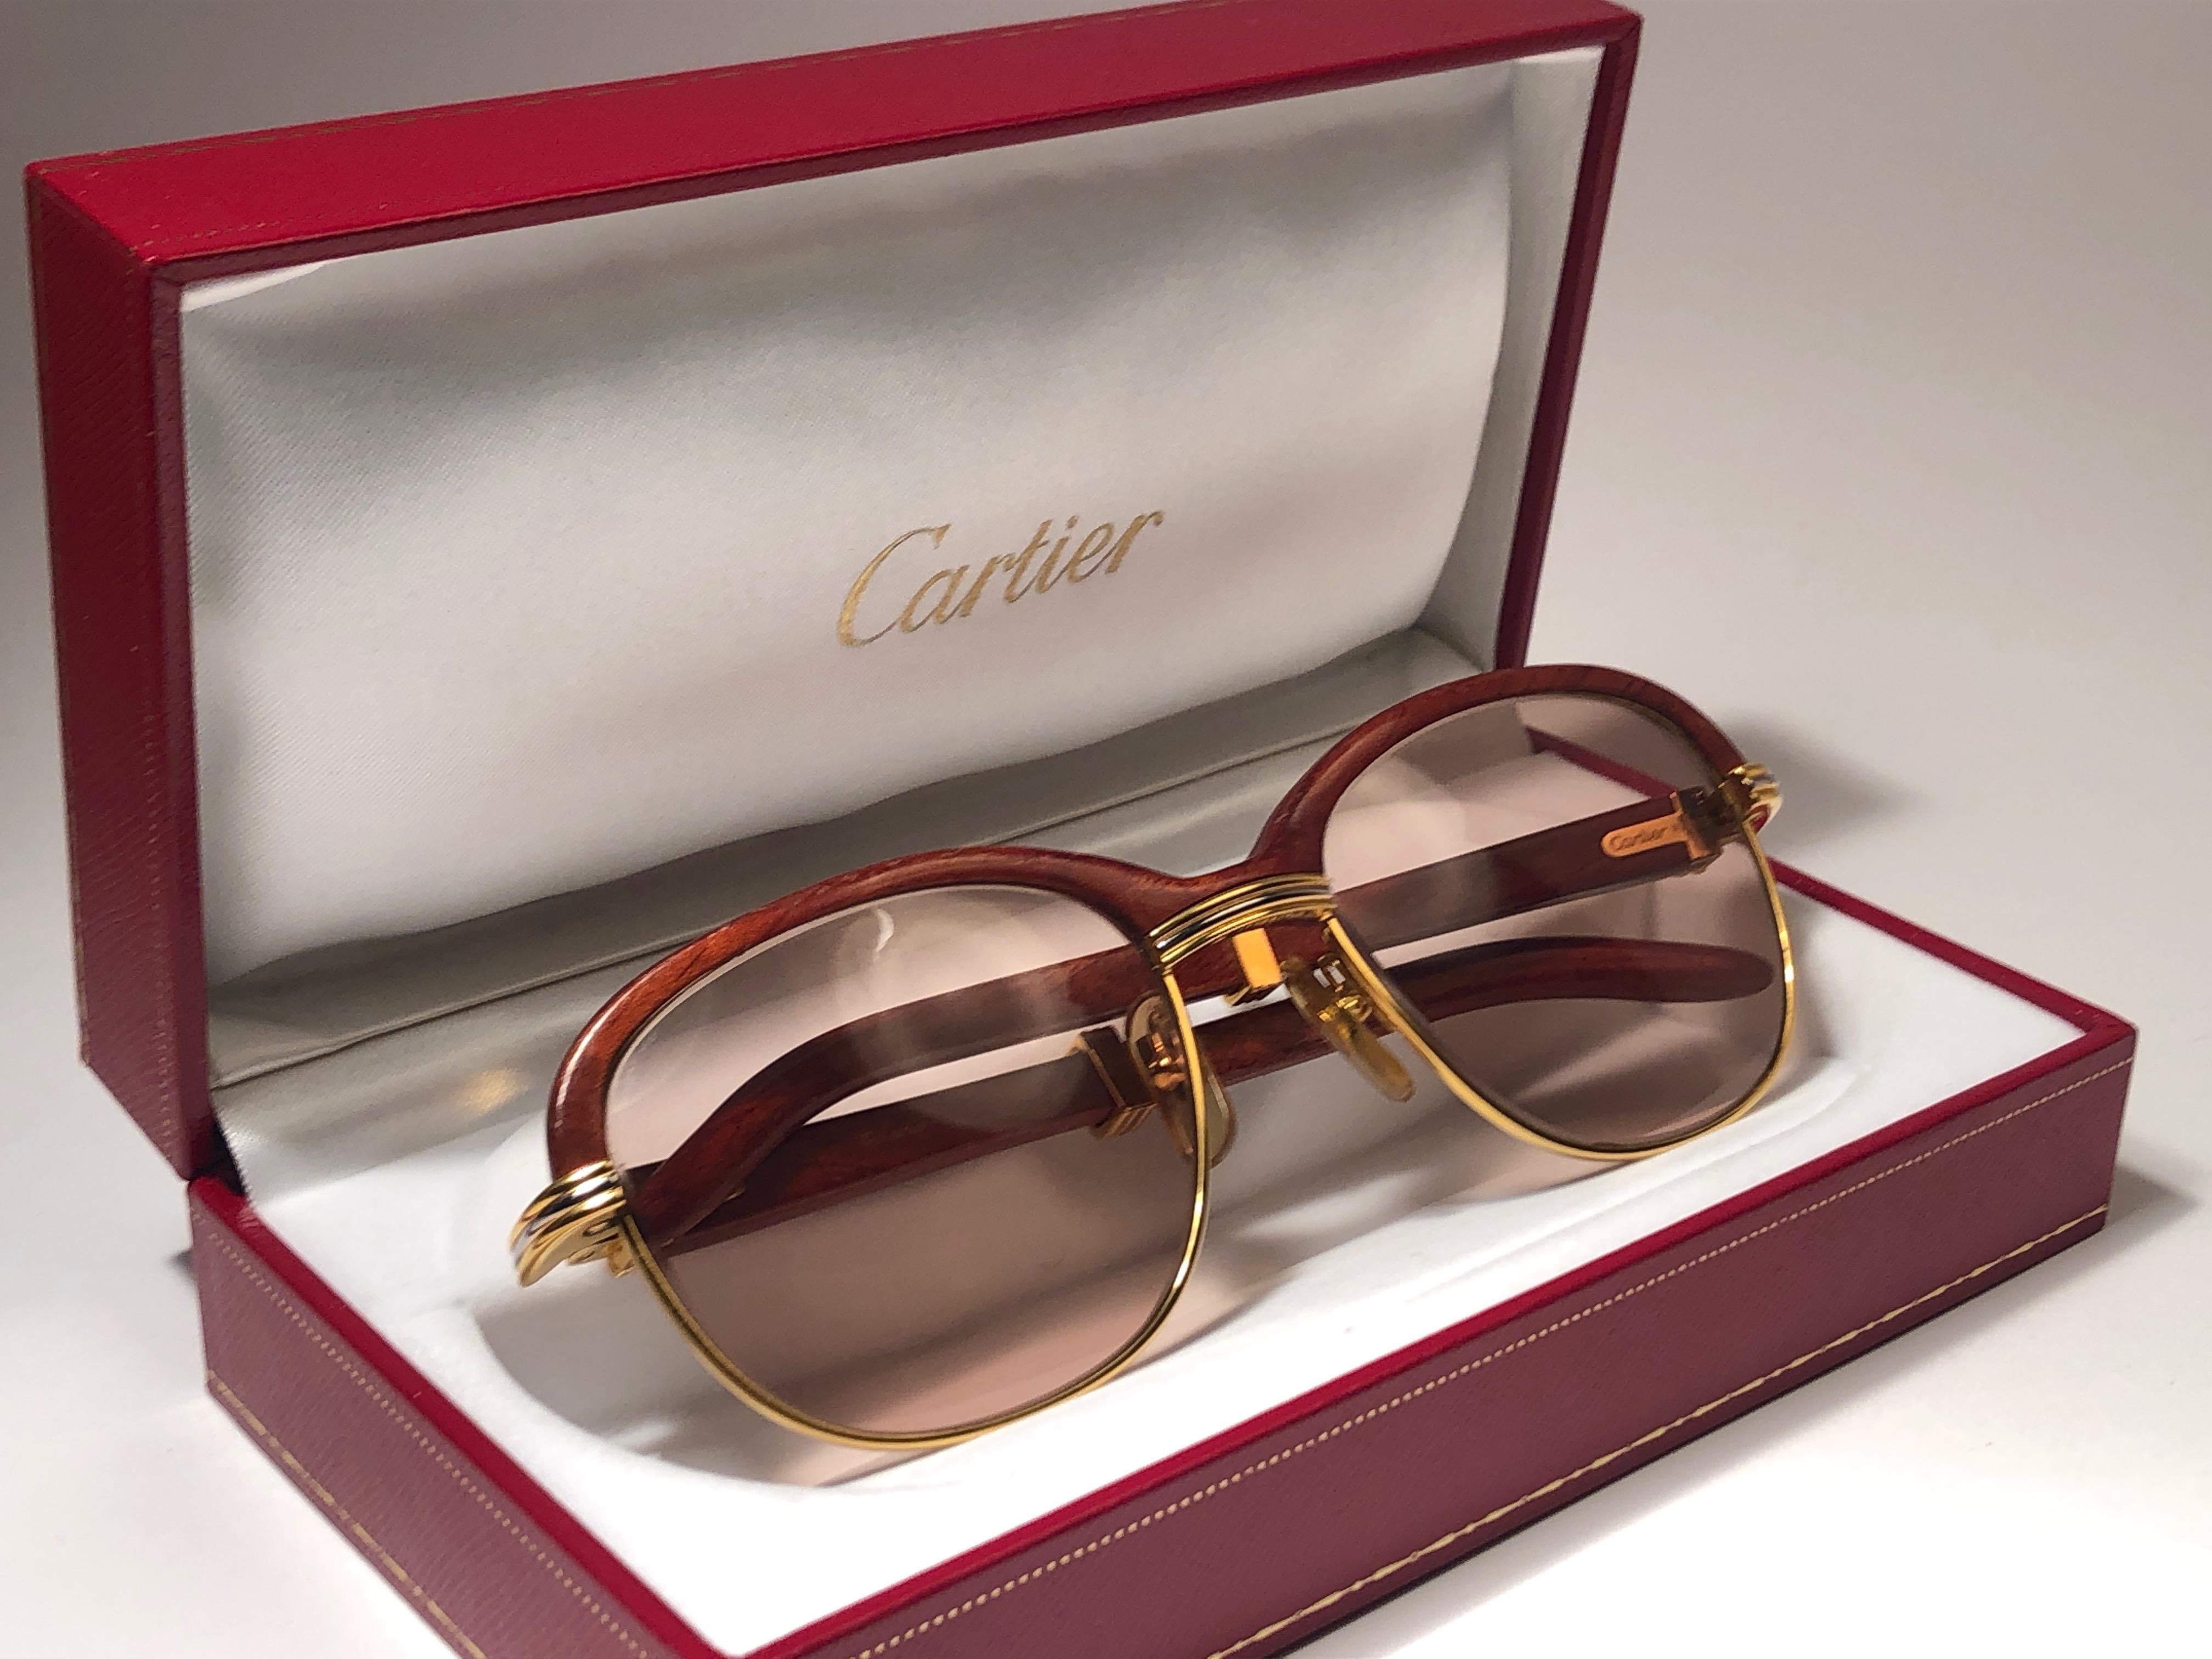 Original New 1990 Cartier Malmaison precious hardwood sunglasses with honey brown (uv protection) lenses. 
Front and sides in yellow and white gold sporting the preeminent wooden front. Palisander temples combined with gold. 
Amazing craftsmanship!